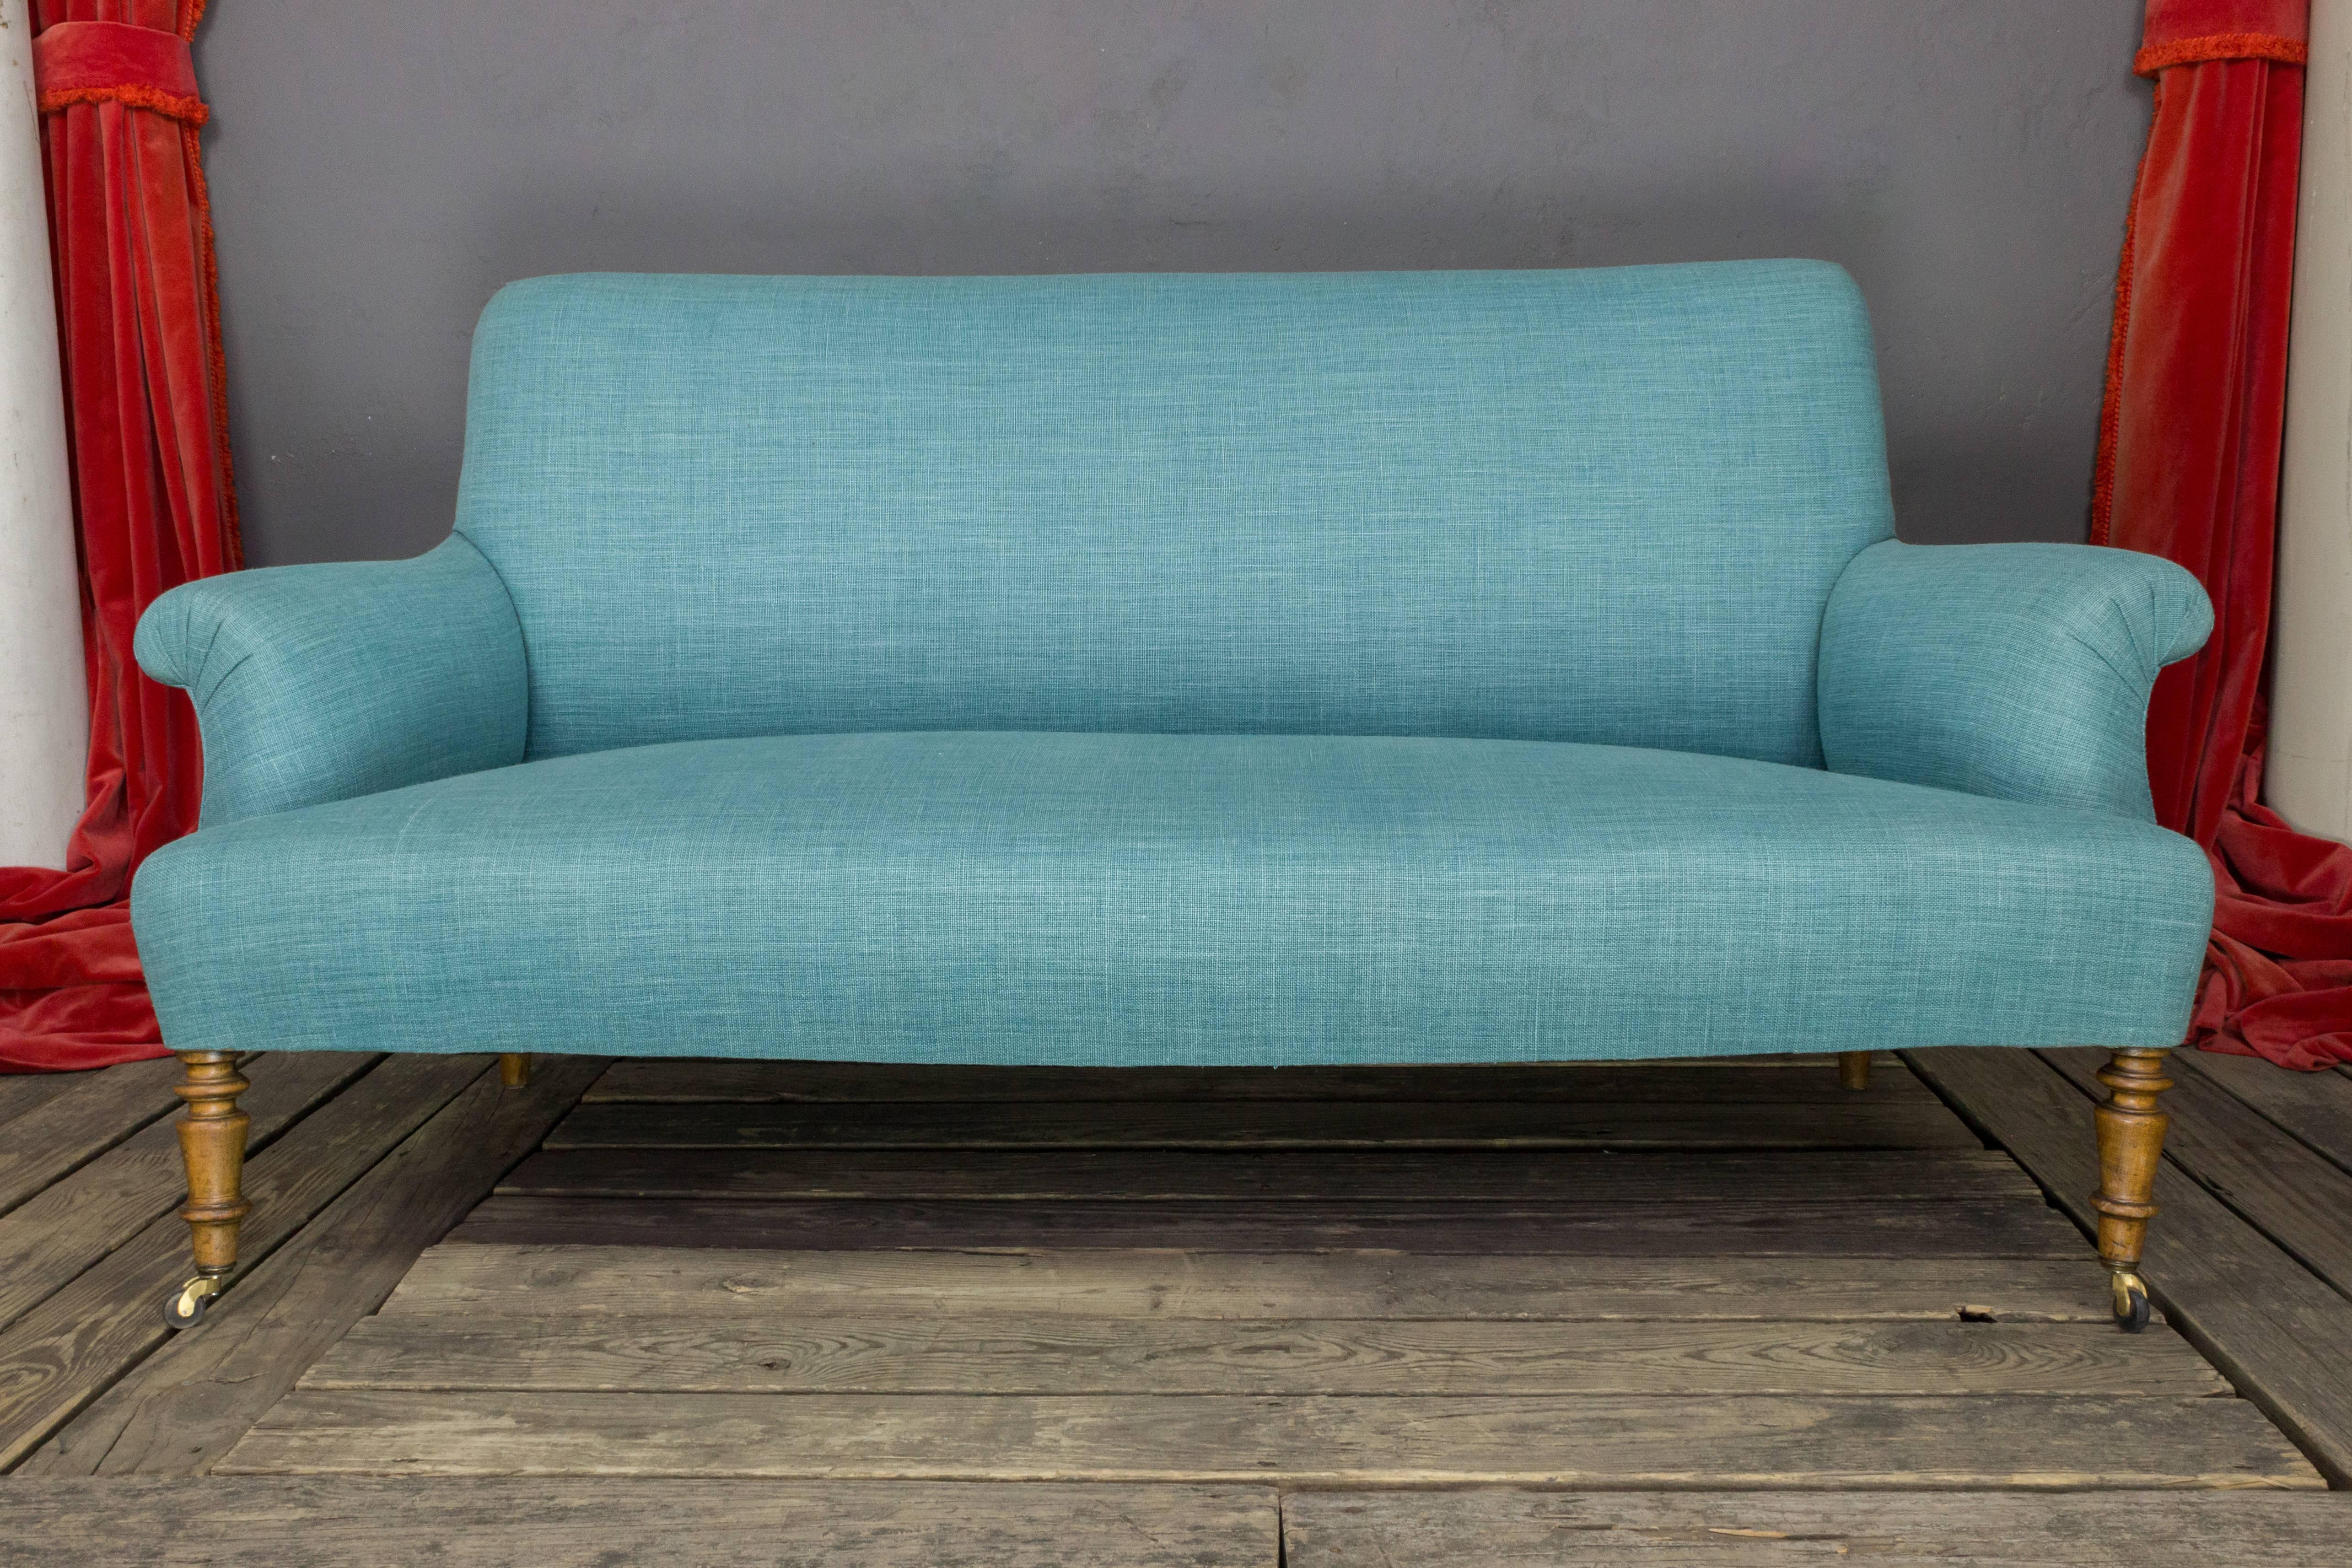 19th century French settee recently upholstered with fresh lagoon colored linen and castors added to front legs.